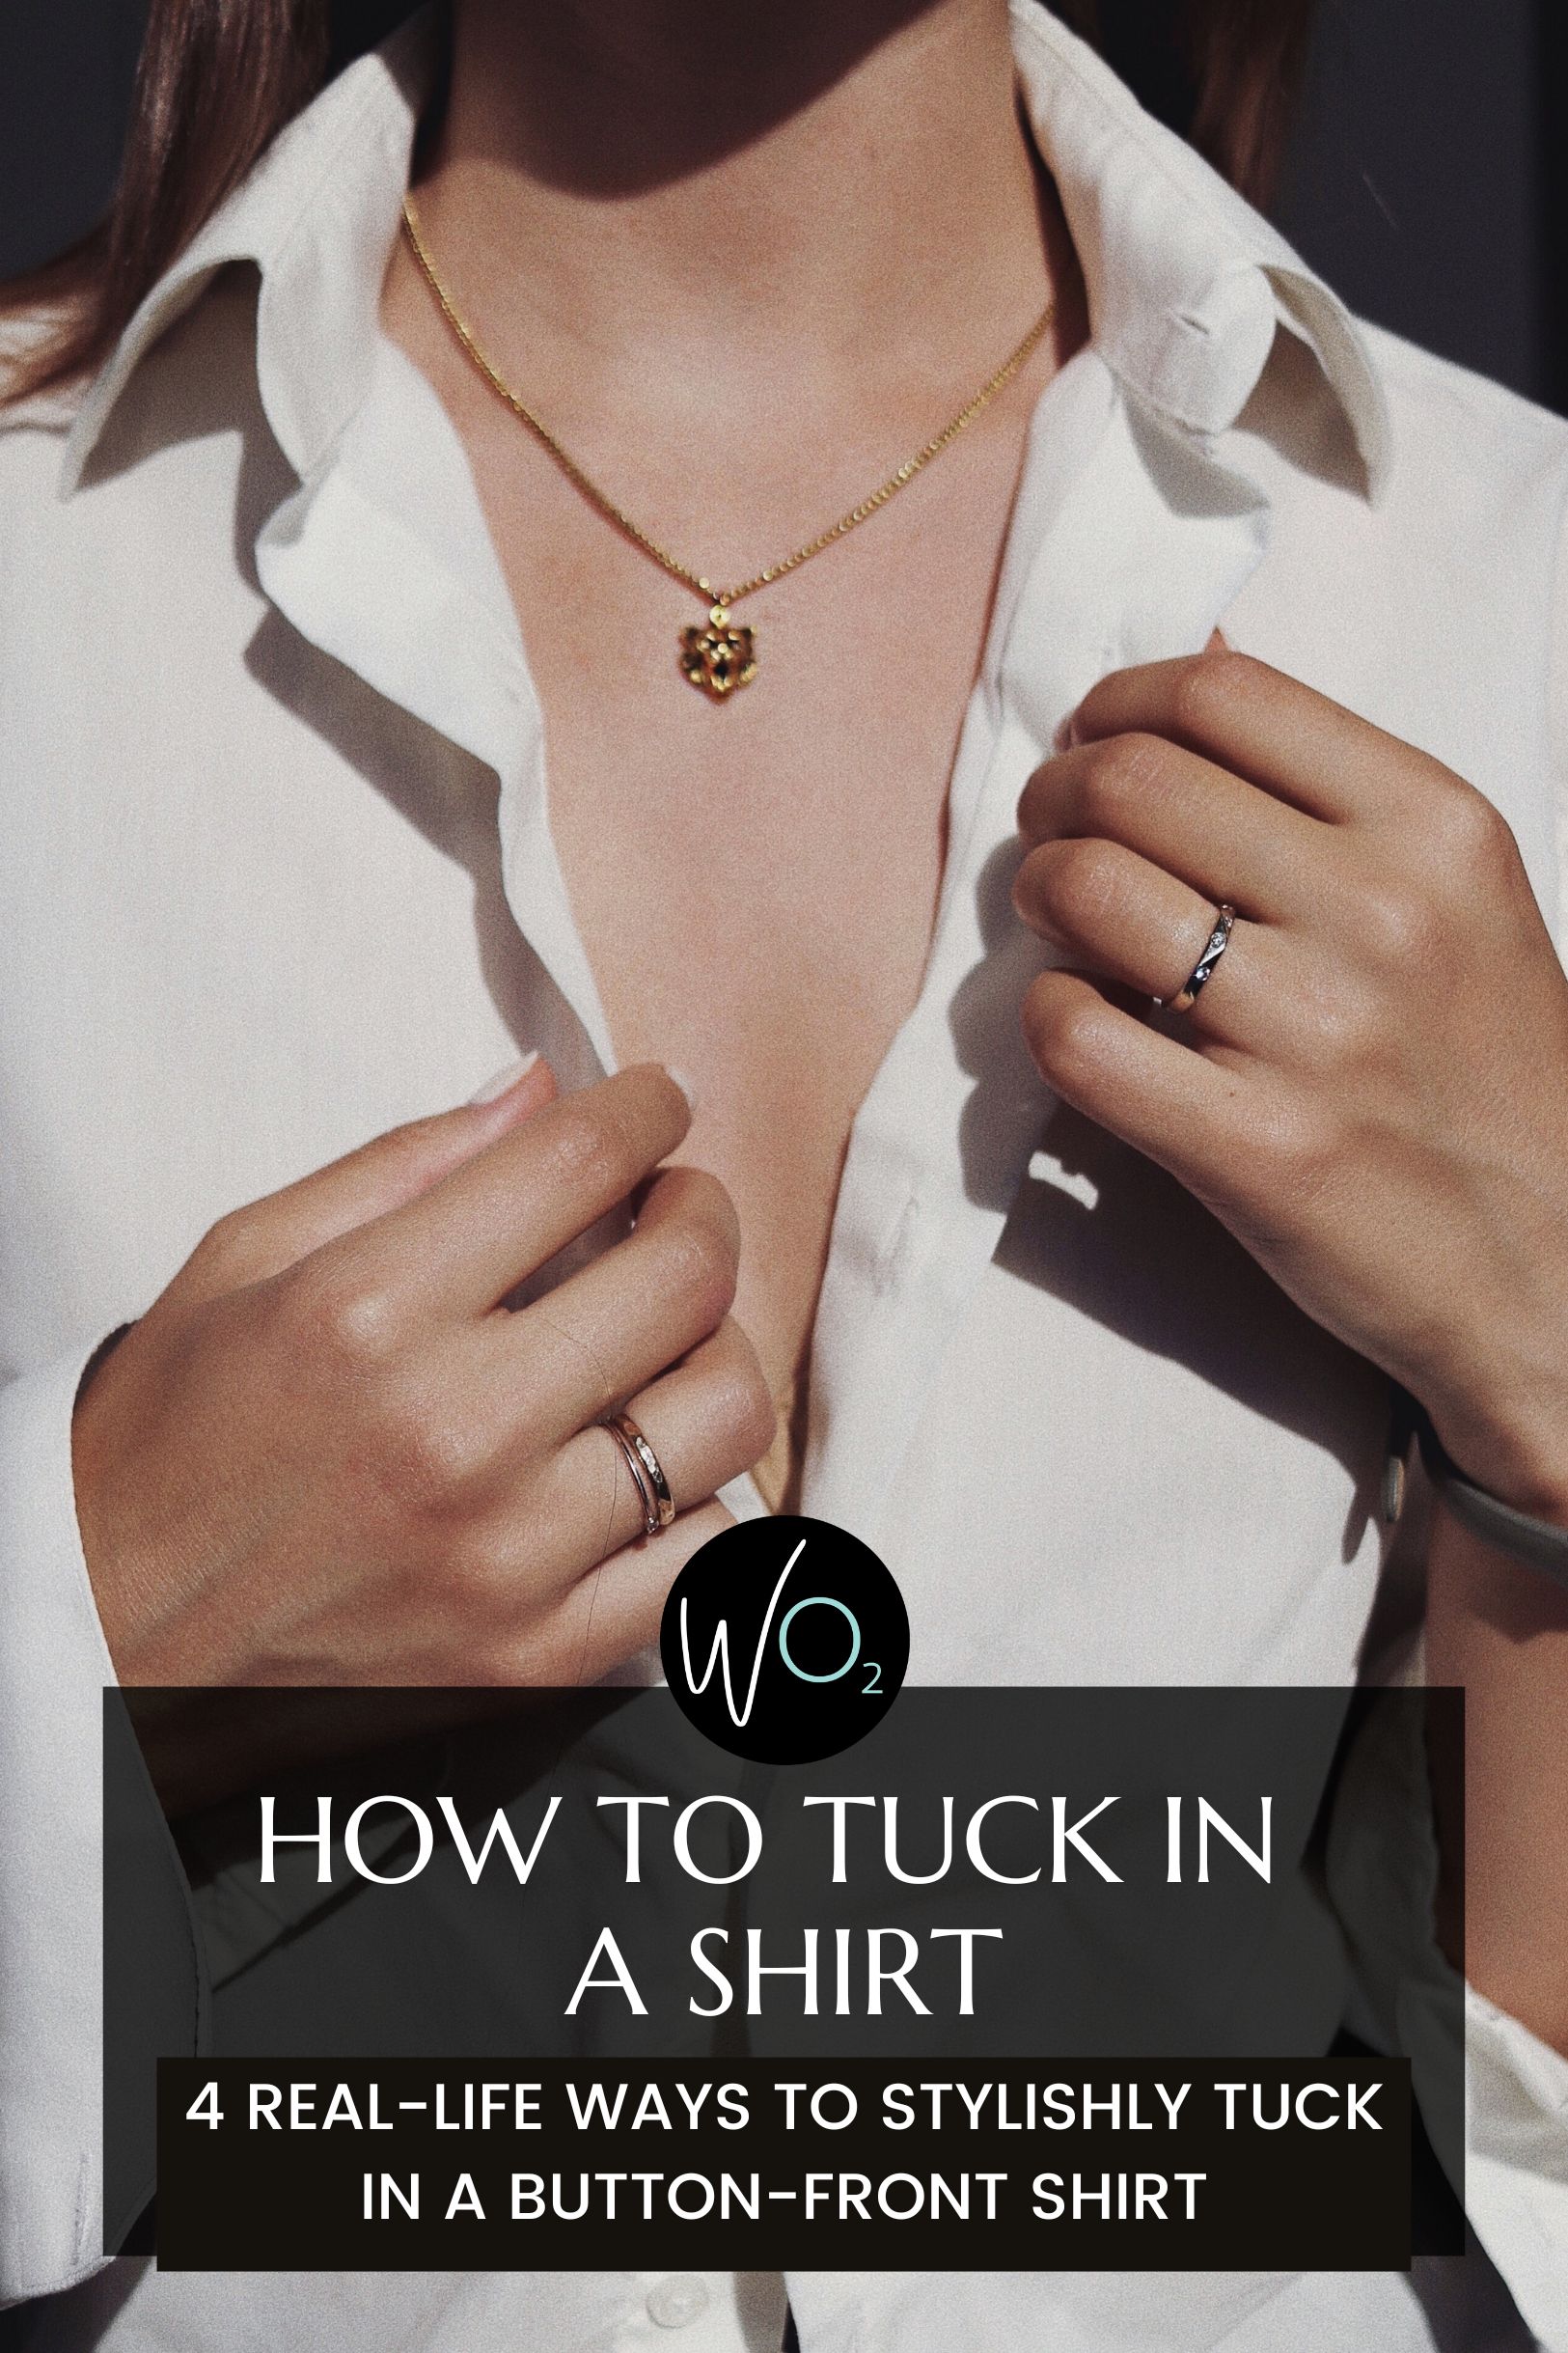 Styling a Stomach: To Tuck or Not to Tuck? - Wardrobe Oxygen